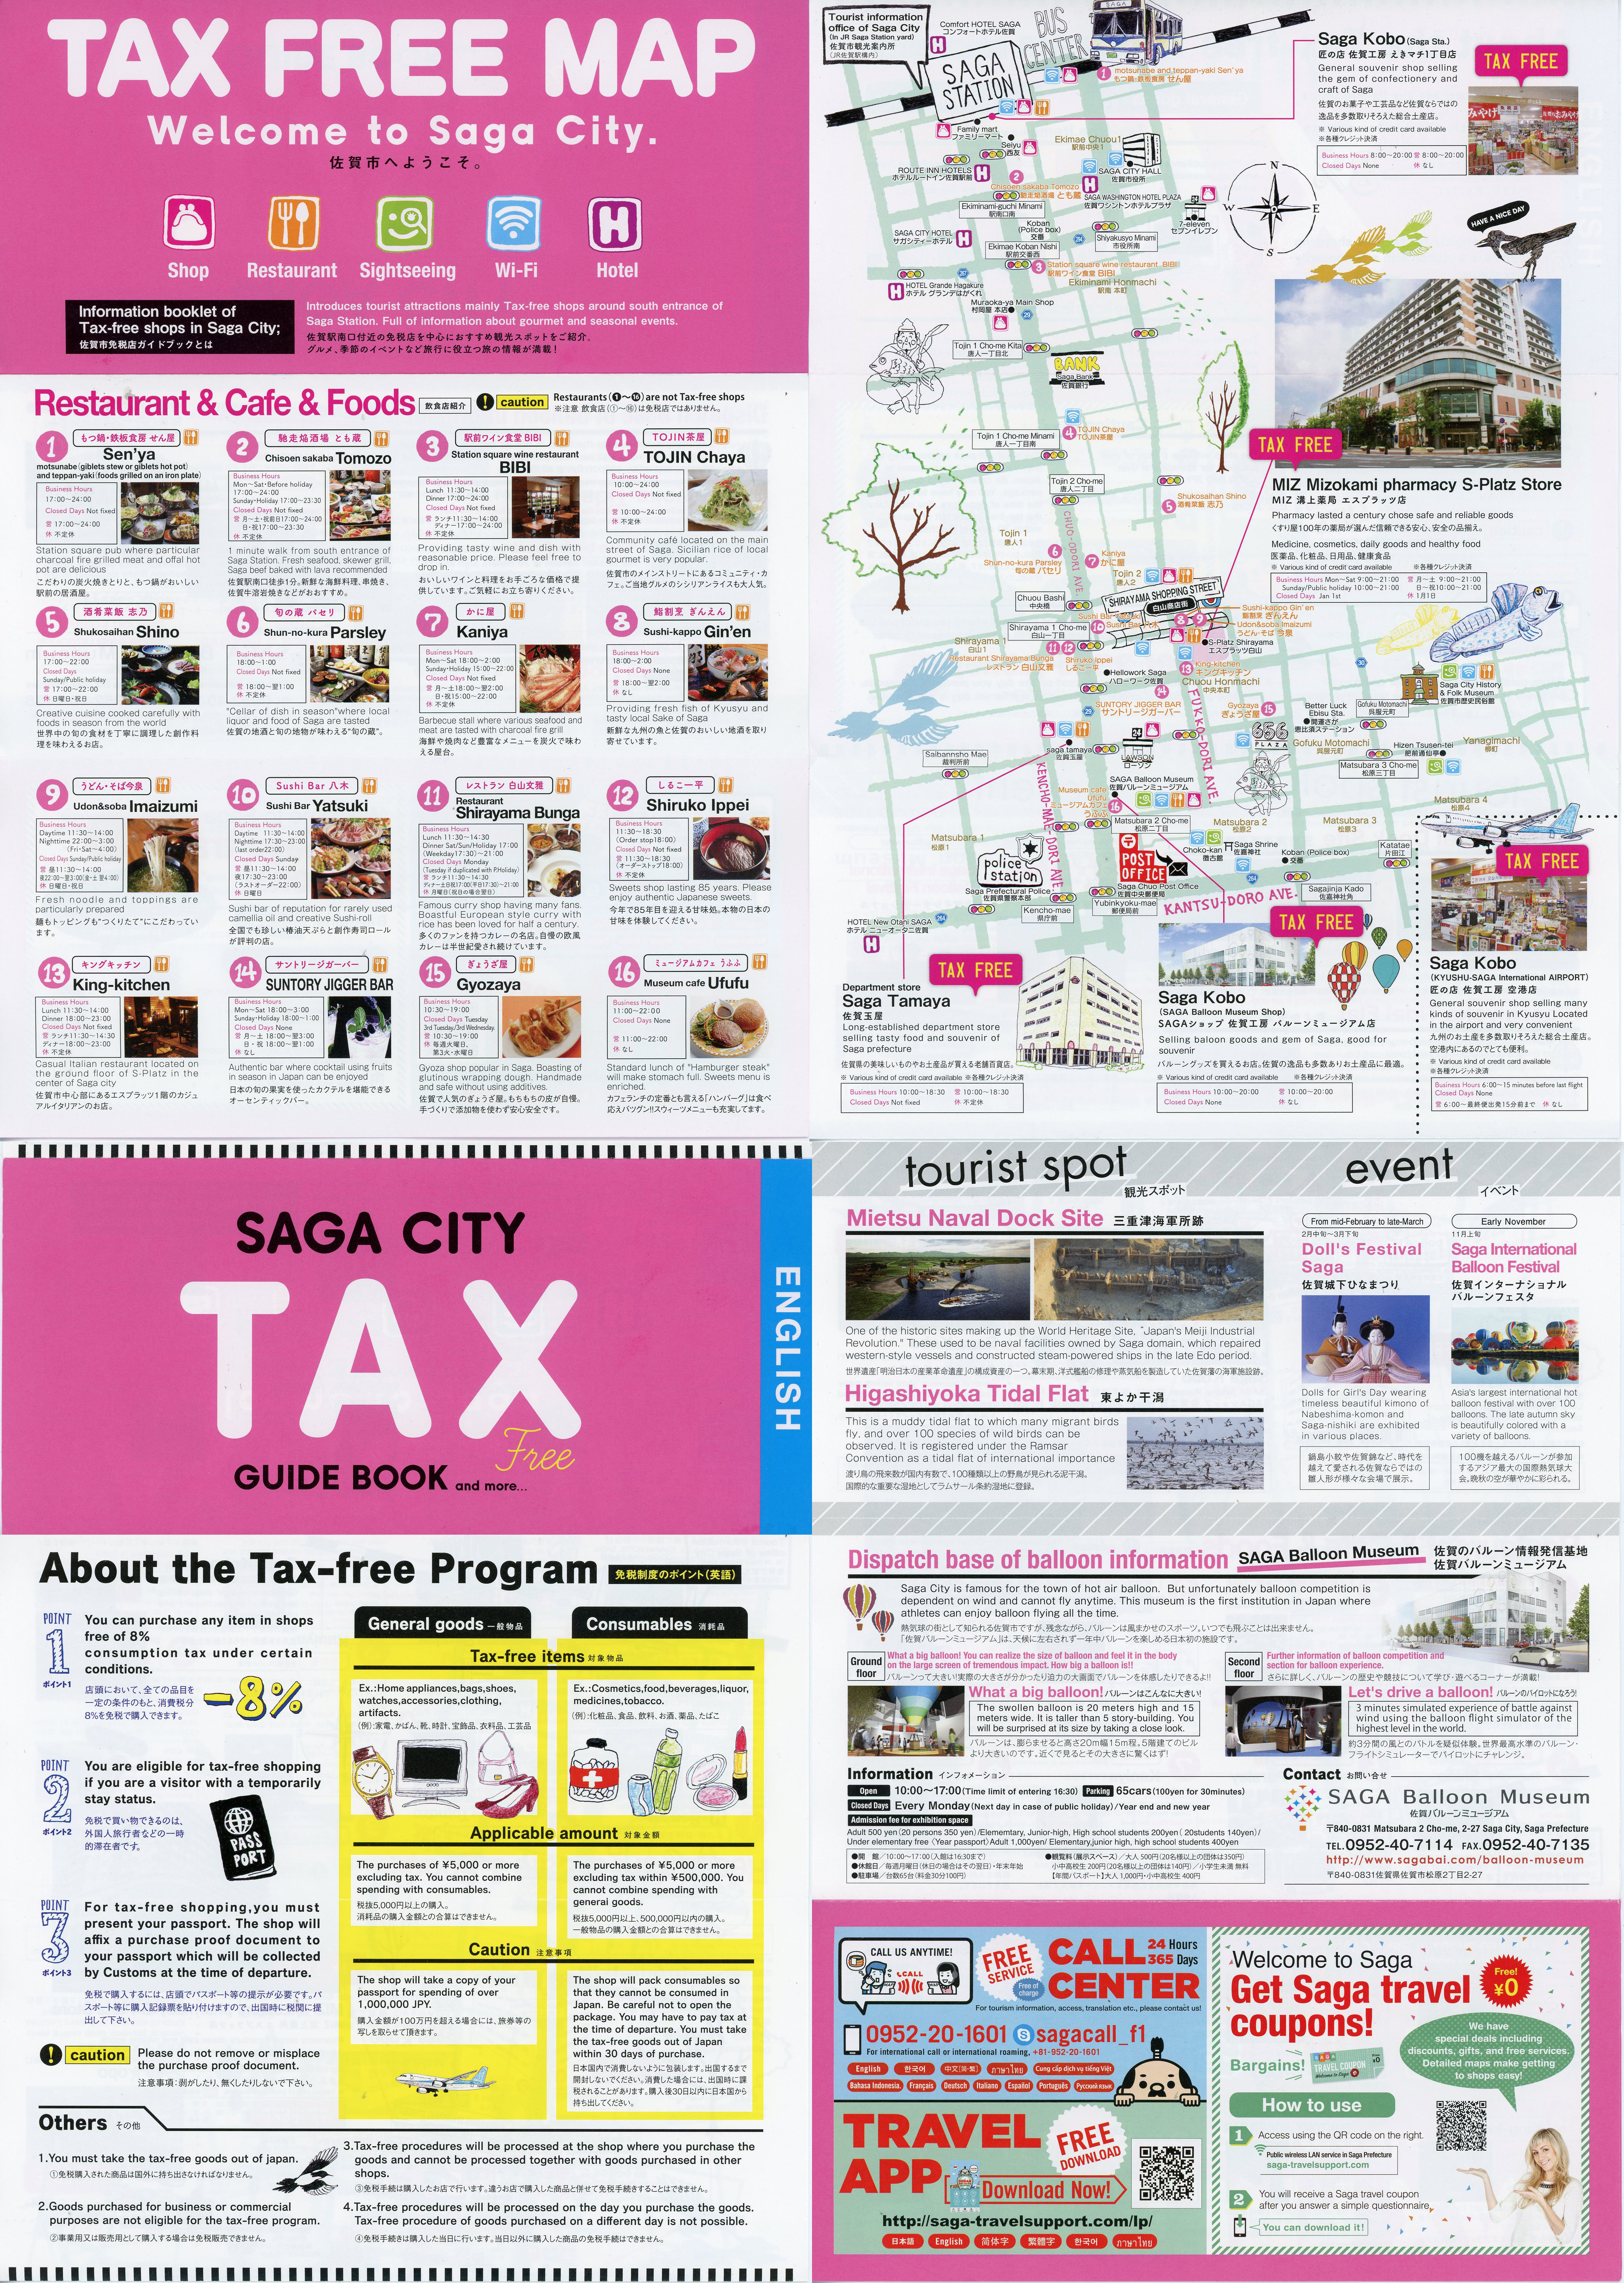 TAX Free GUIDE BOOK